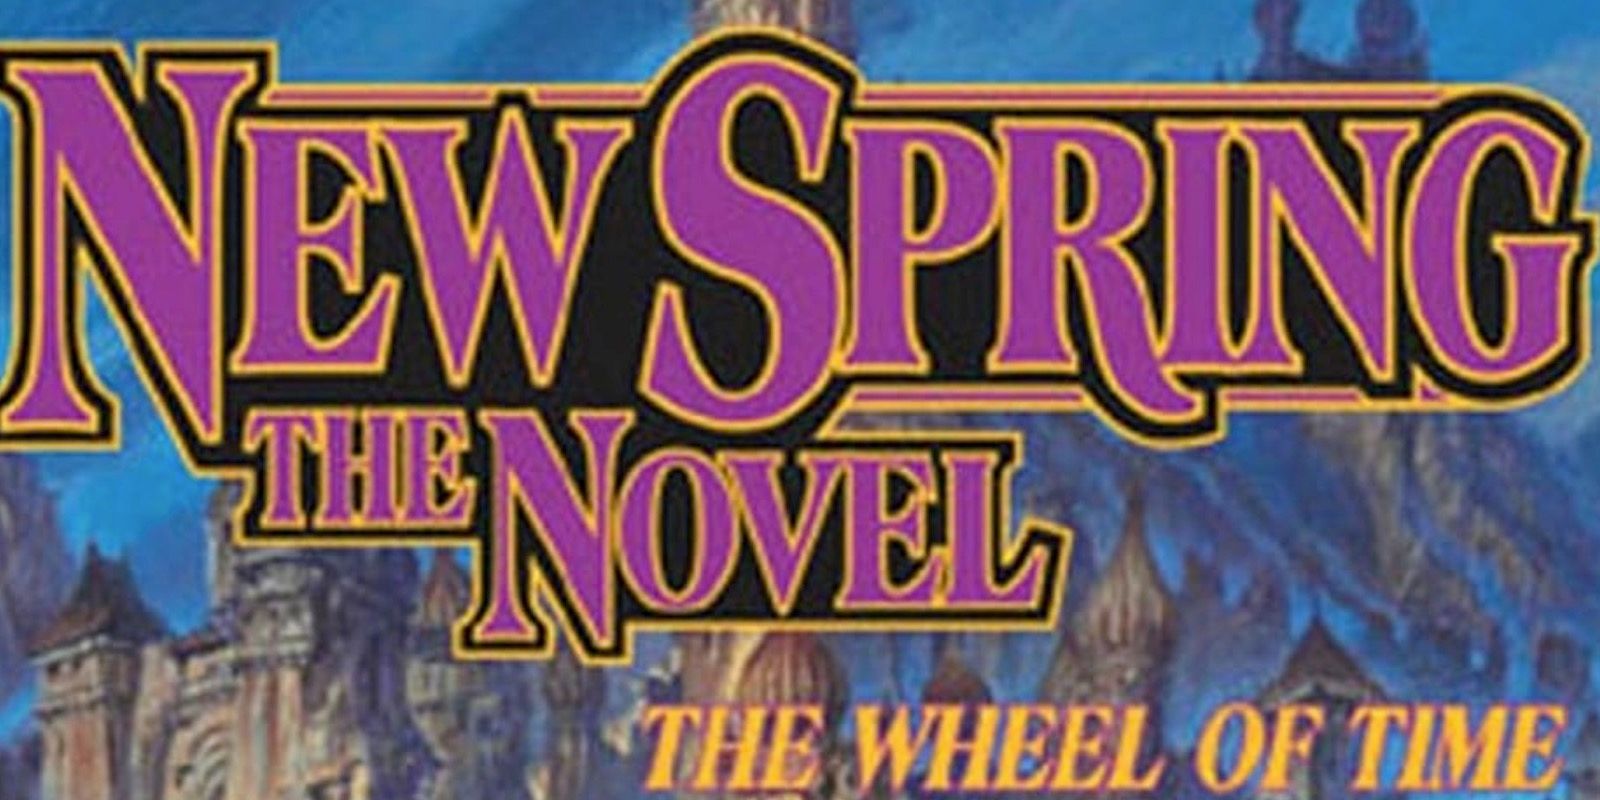 The cover of New Spring by Robert Jordan.